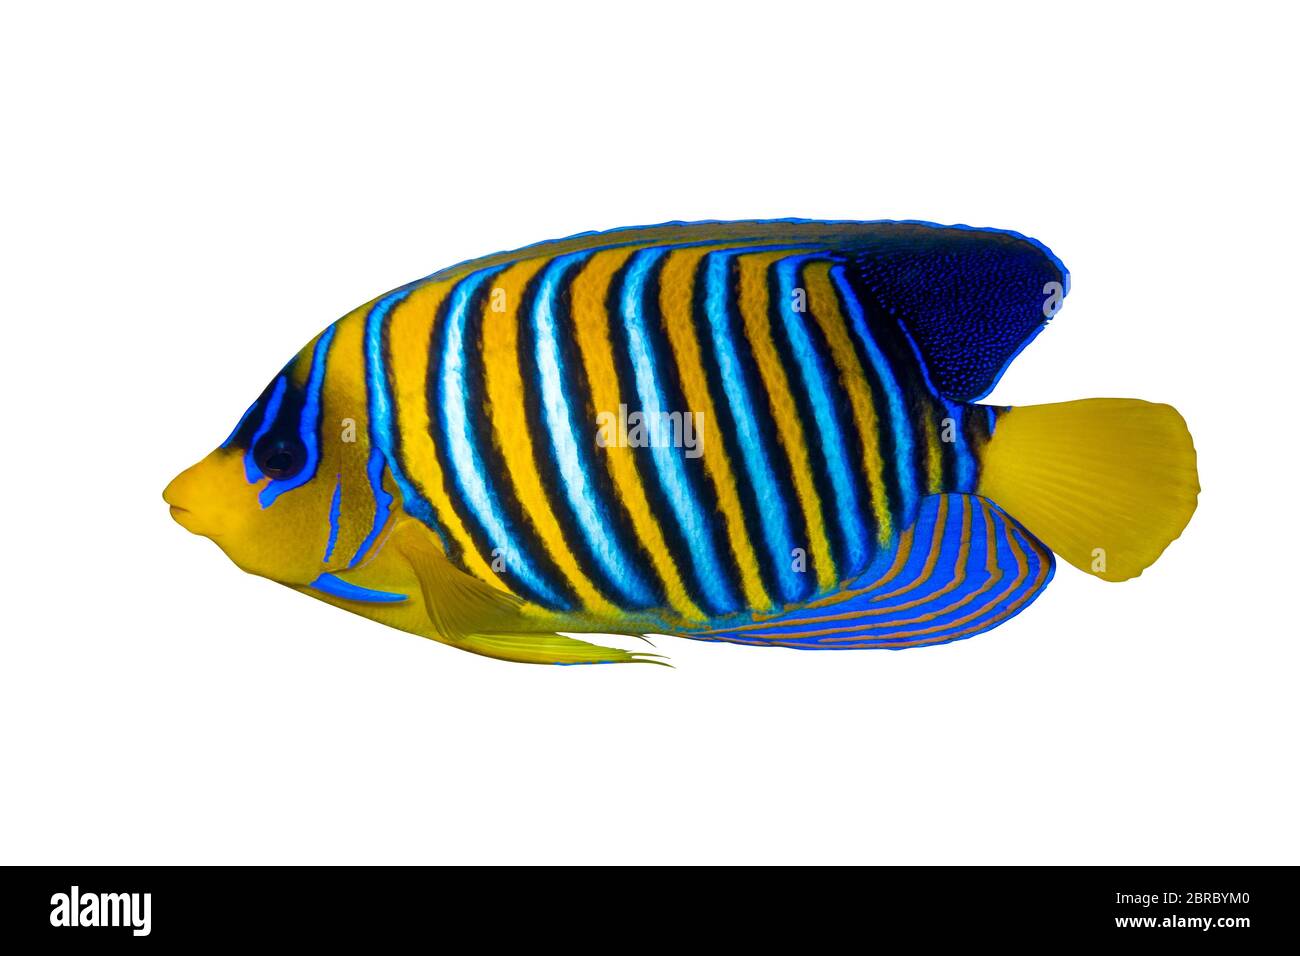 Royal Angelfish (Regal Angel Fish), Coralfish isolated on a white background. Tropical colorful fish with yellow fins, orange, white and blue stripes Stock Photo